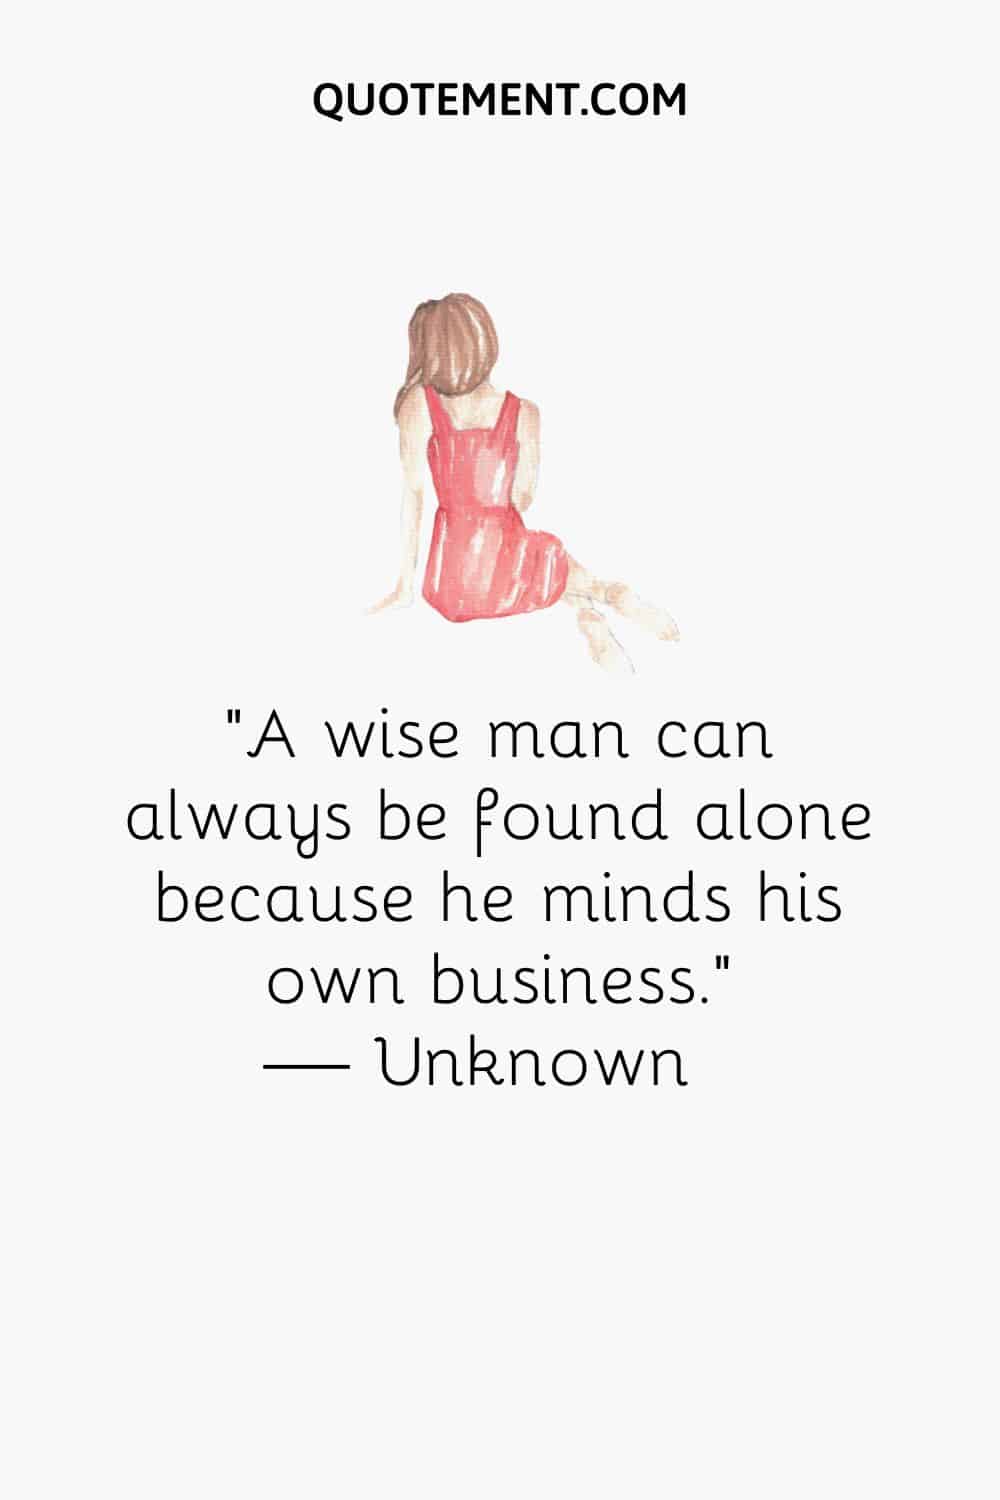 A wise man can always be found alone because he minds his own business